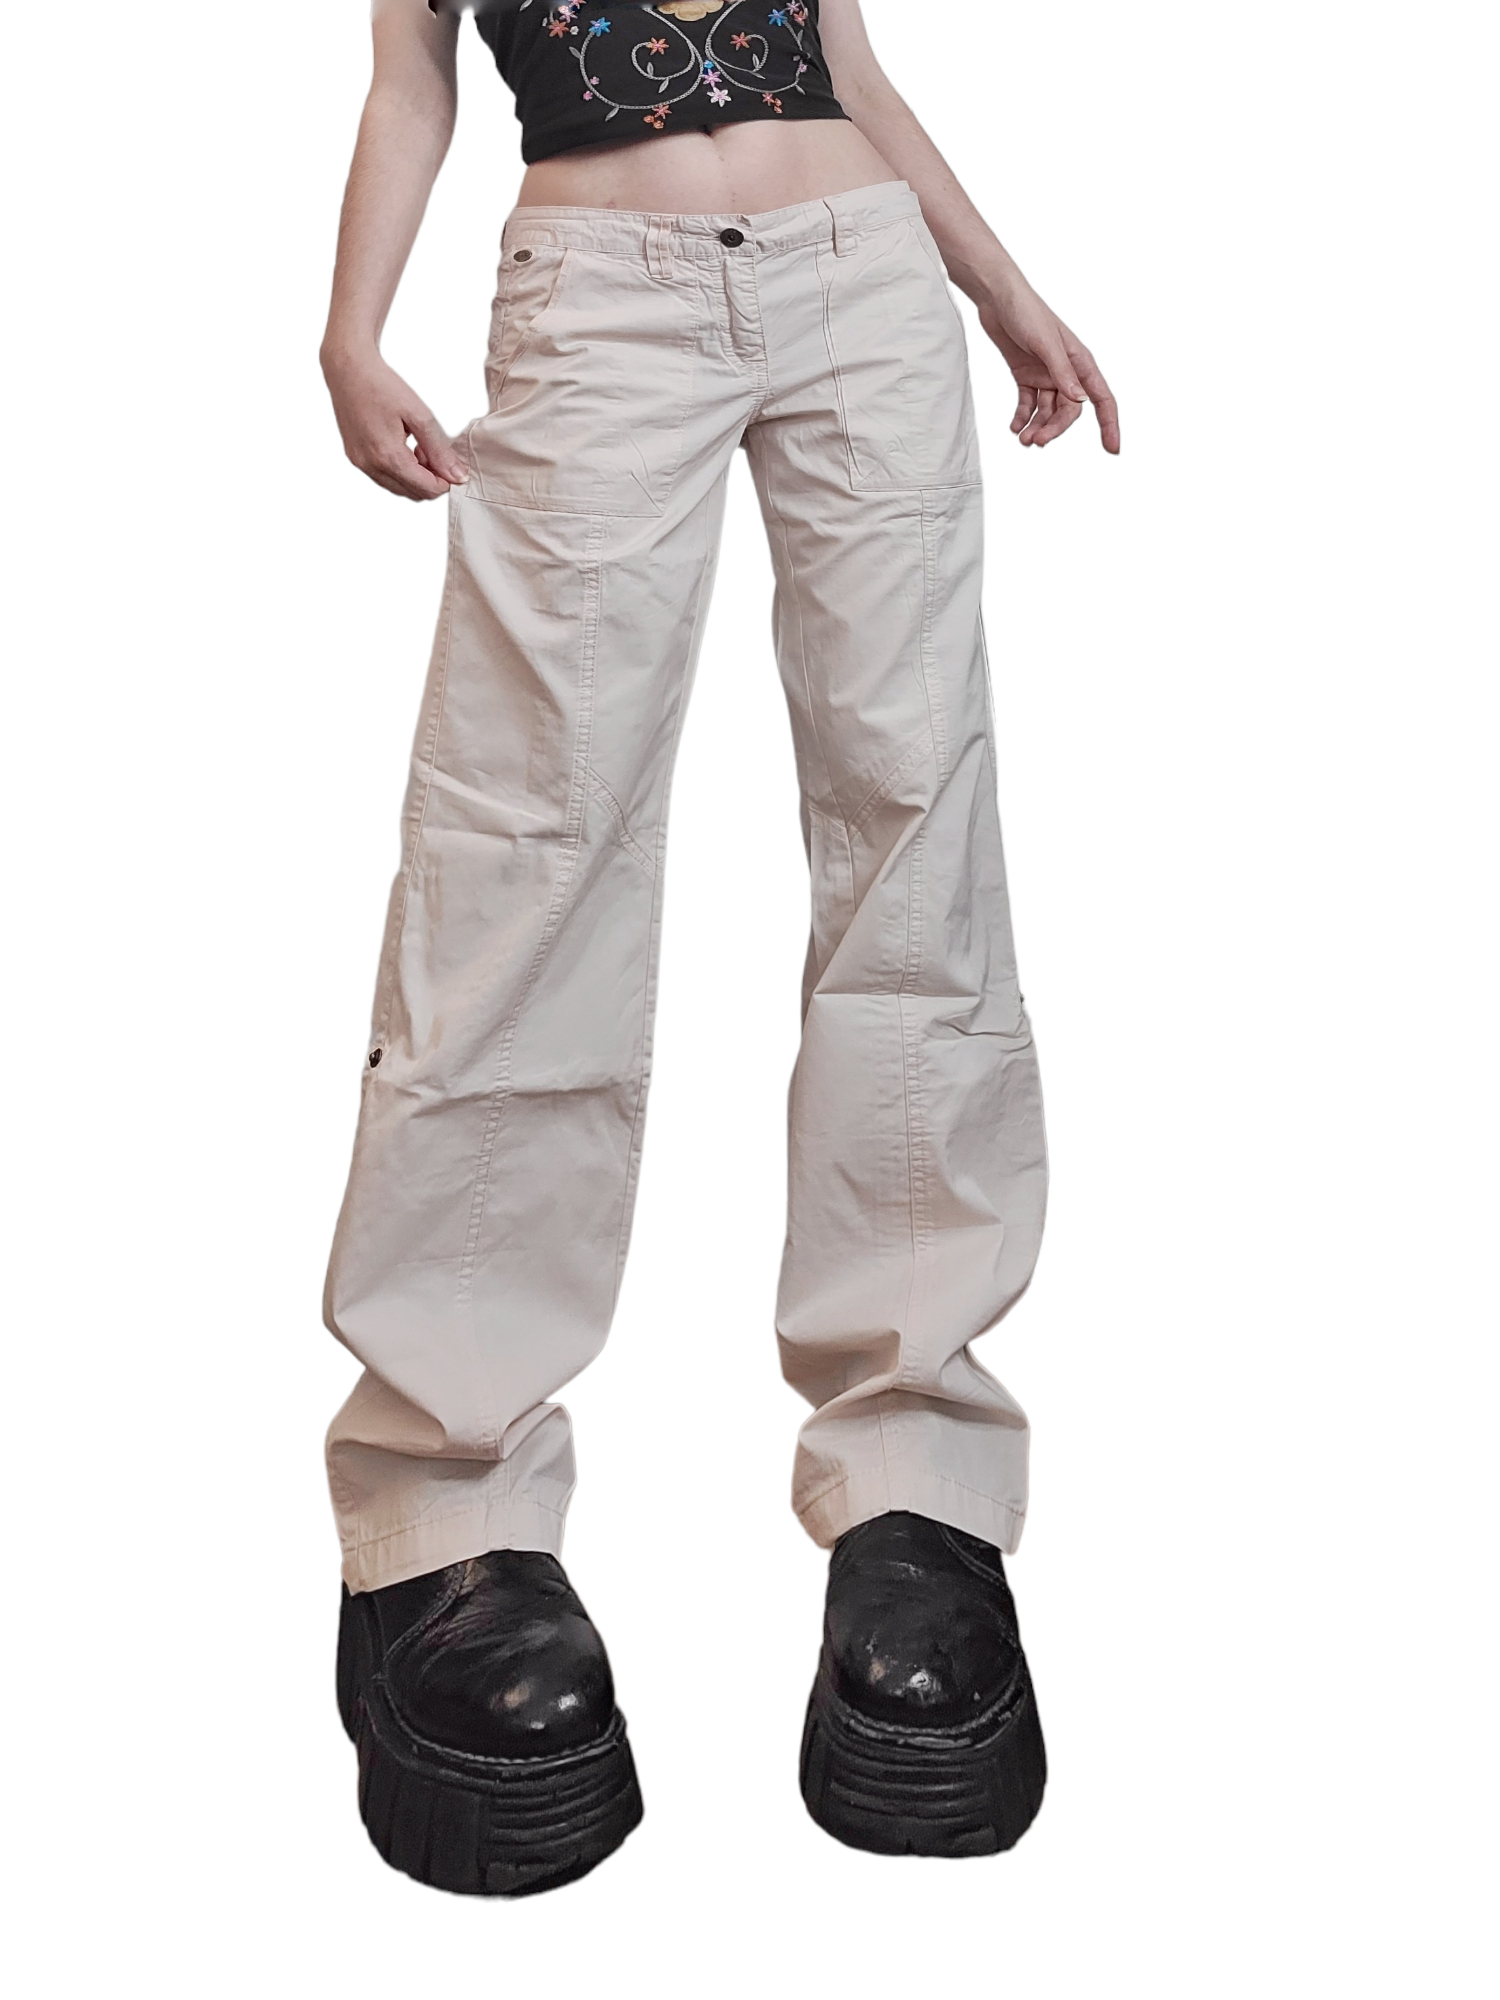 Cargo overpants grunge skater 90s multipoches y2k cybery2k cybergrunge